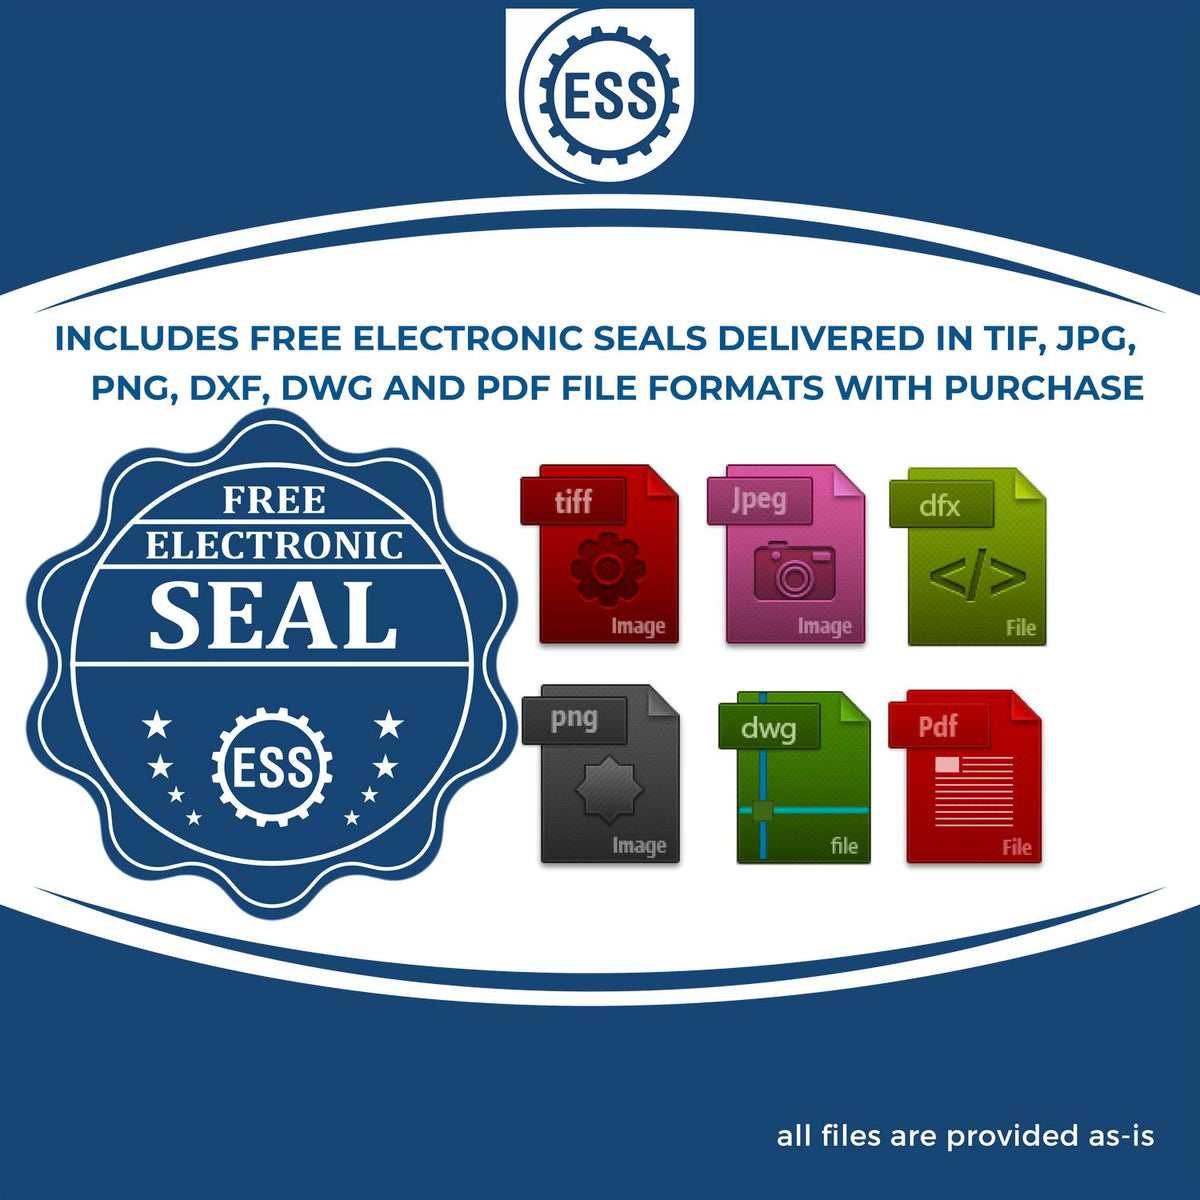 An infographic for the free electronic seal for the State of Michigan Extended Long Reach Geologist Seal illustrating the different file type icons such as DXF, DWG, TIF, JPG and PNG.